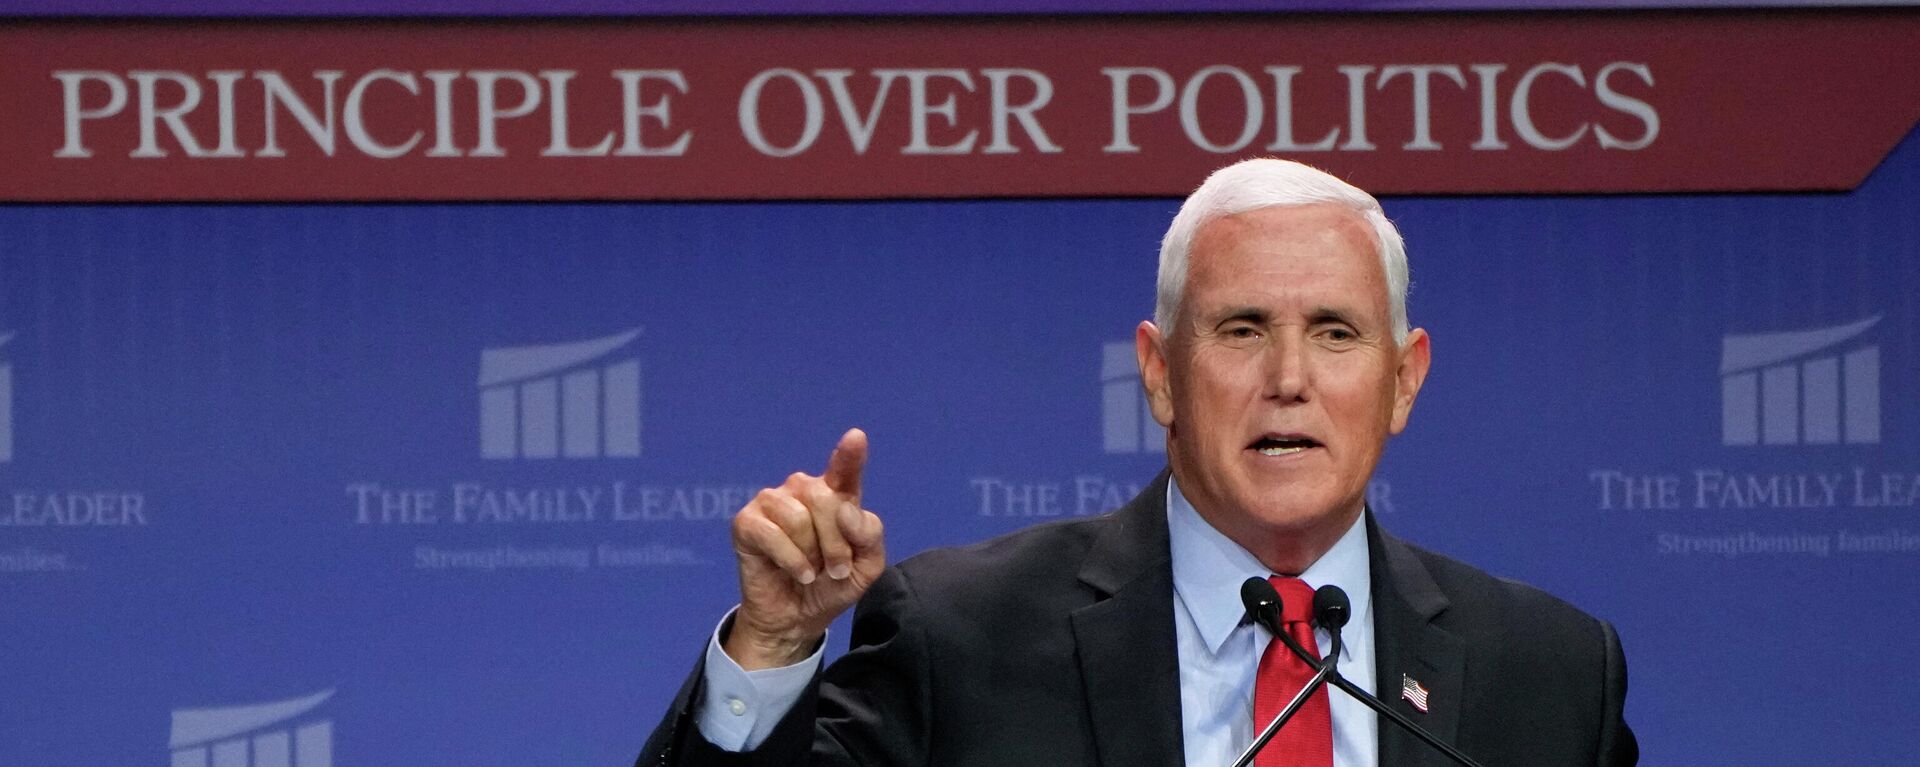 Former Vice President Mike Pence speaks during the Family Leadership Summit, Friday, July 16, 2021, in Des Moines, Iowa. - Sputnik International, 1920, 10.10.2021